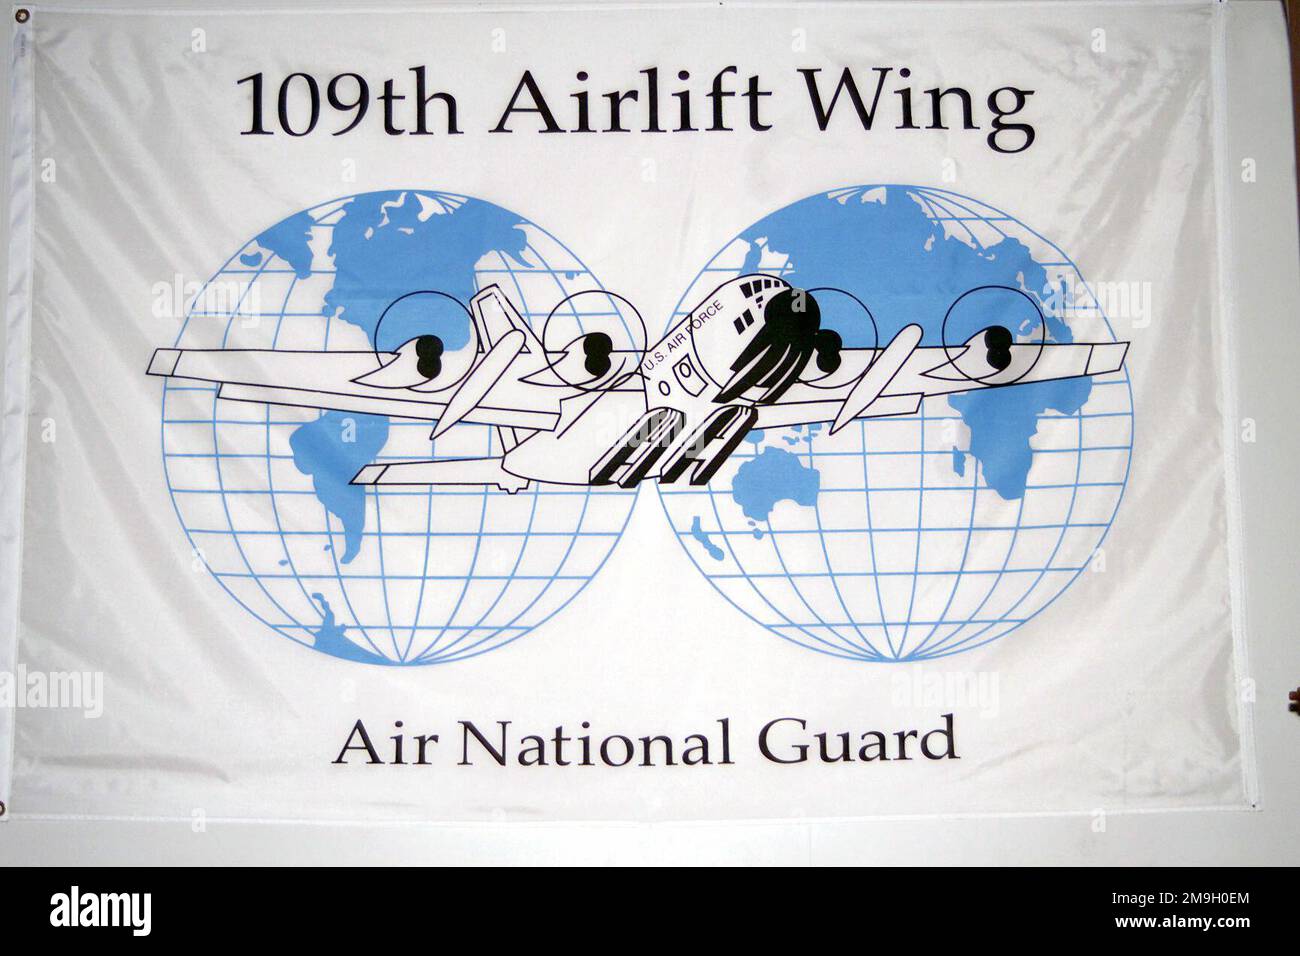 The flag of the 109th Airlift Wing, New York Air National Guard located in its Operations Center at Christchurch, New Zealand. The unit is deployed to New Zealand in support of Operation DEEP FREEZE 2001 and flying missions to and from the South Pole. Subject Operation/Series: DEEP FREEZE 2001 Base: Christchurch State: Canterbury Country: New Zealand (NZL) Scene Major Command Shown: ANG Stock Photo